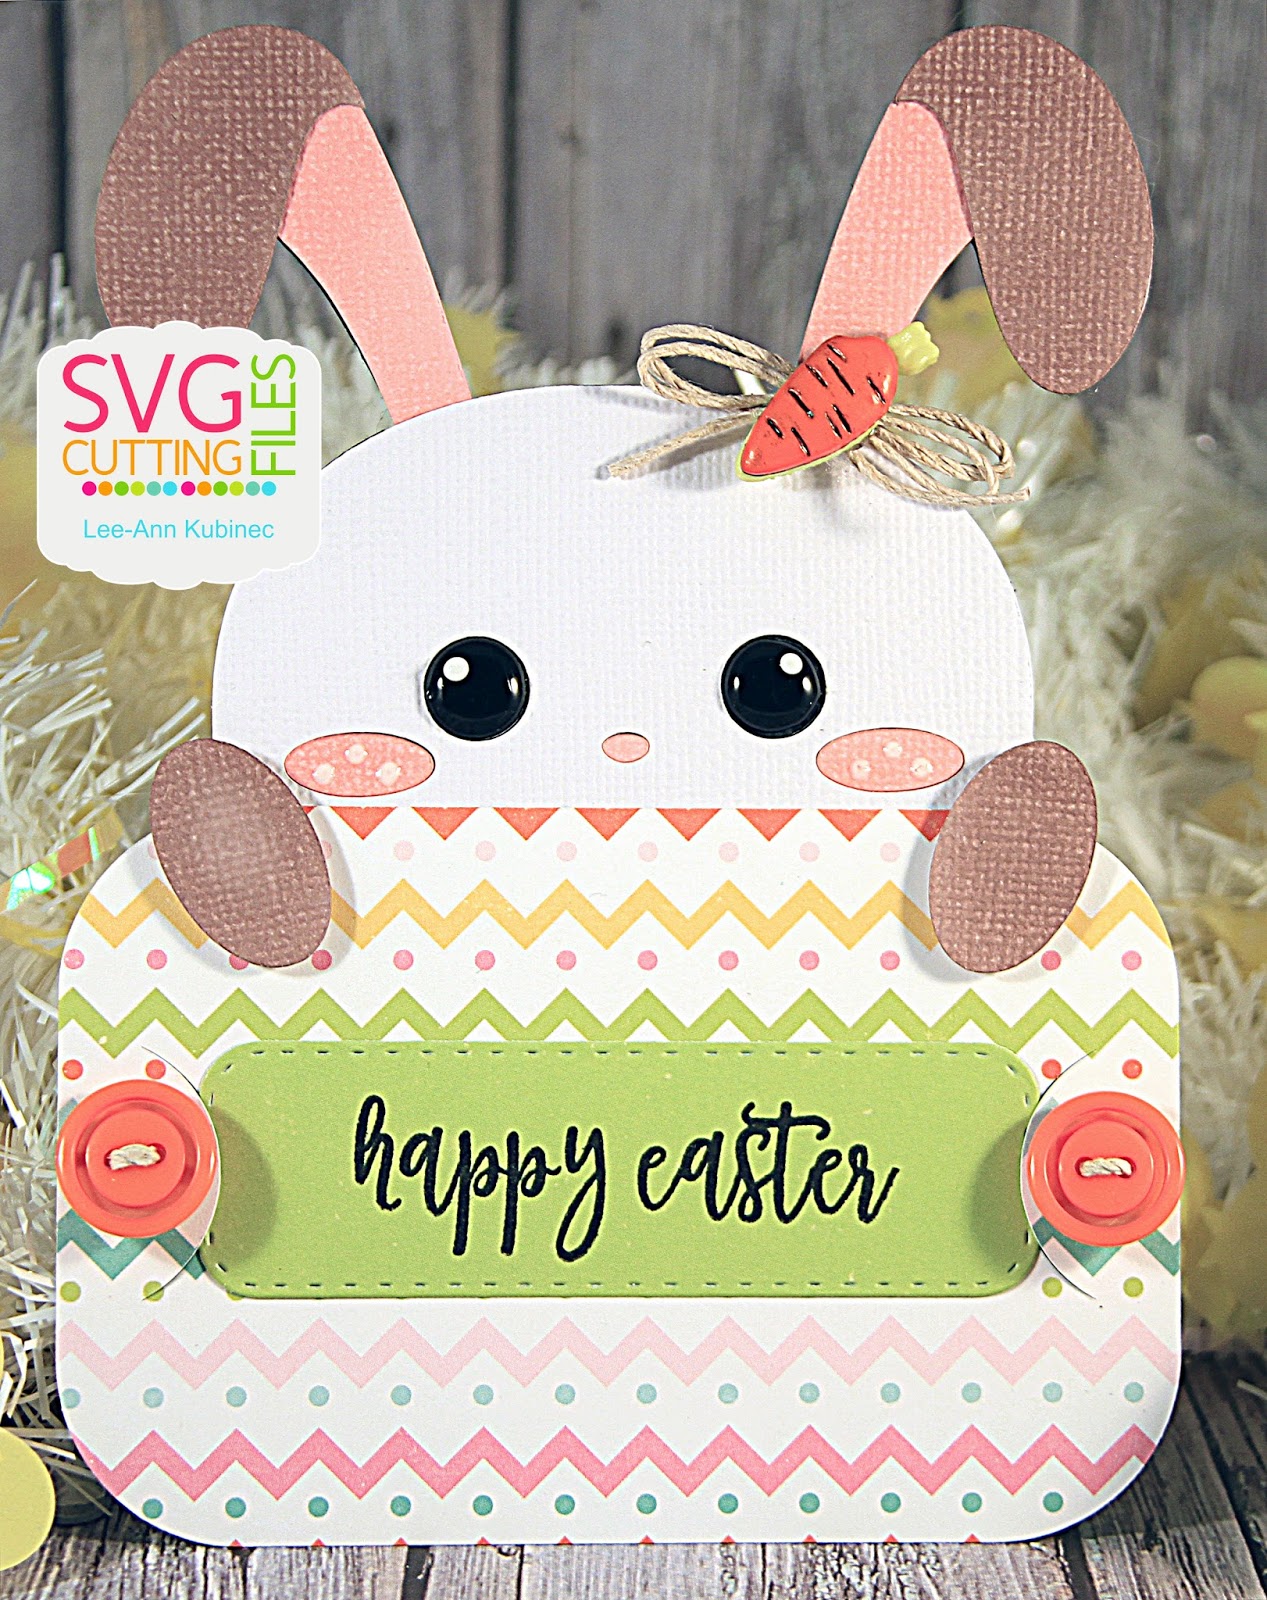 Download SVG Cutting Files: NEW Bunny Peeker Gift Card Holder